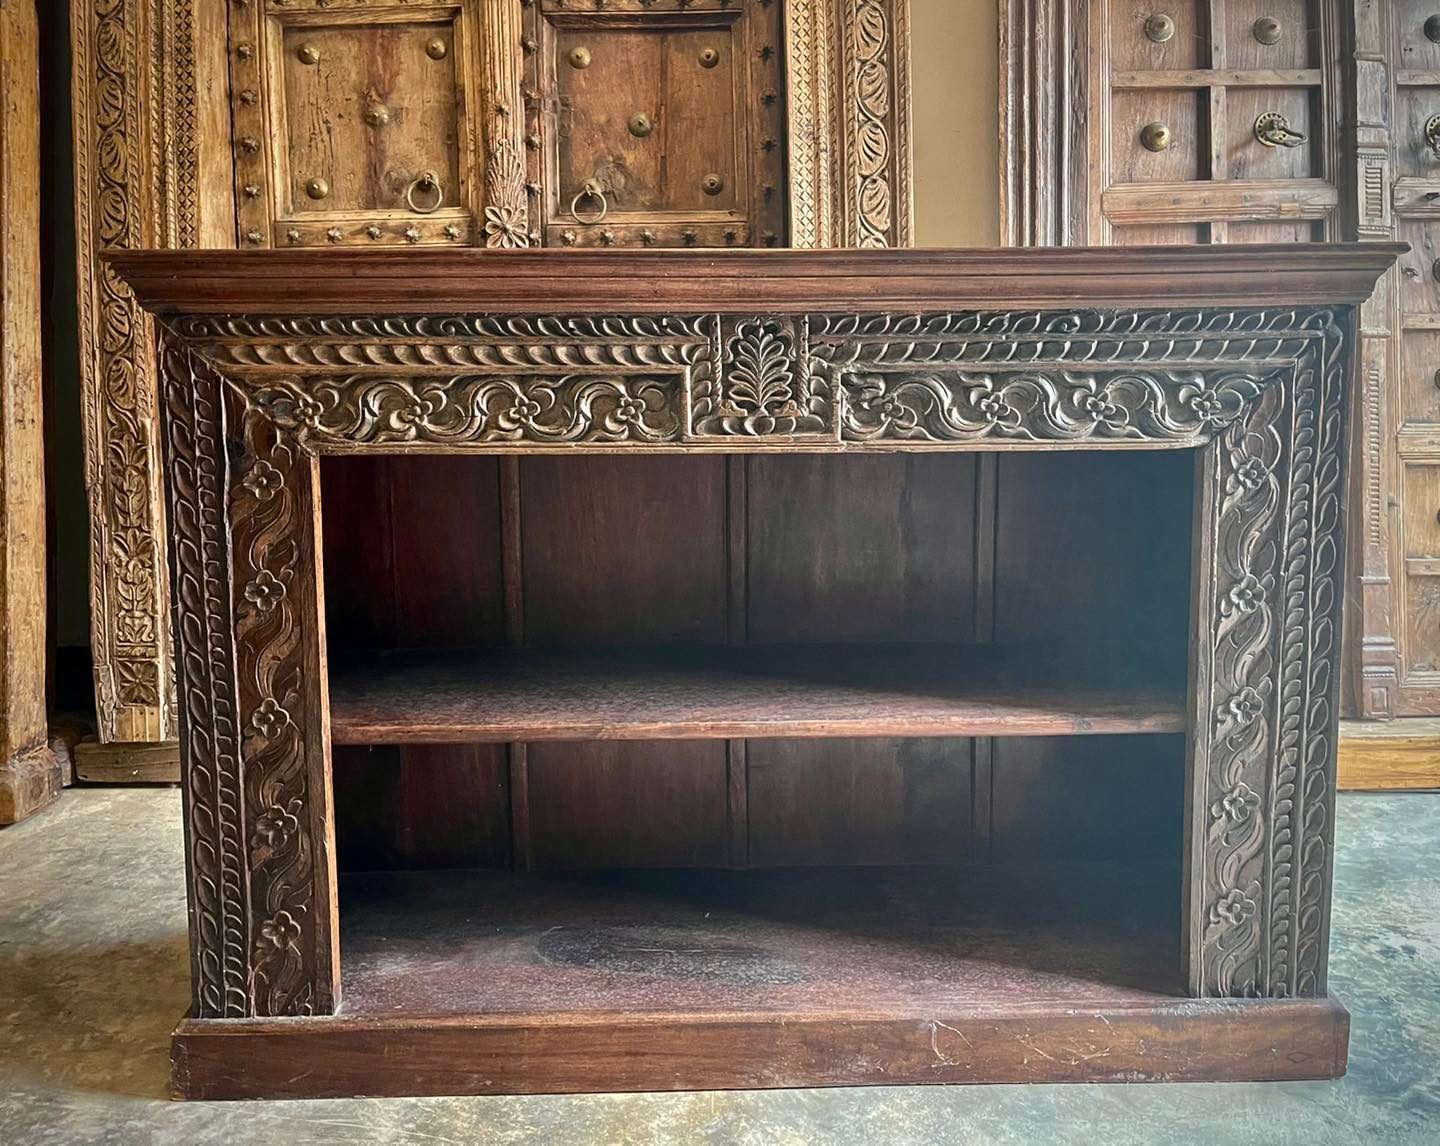 BK1 Indian Style Carved Book Rack